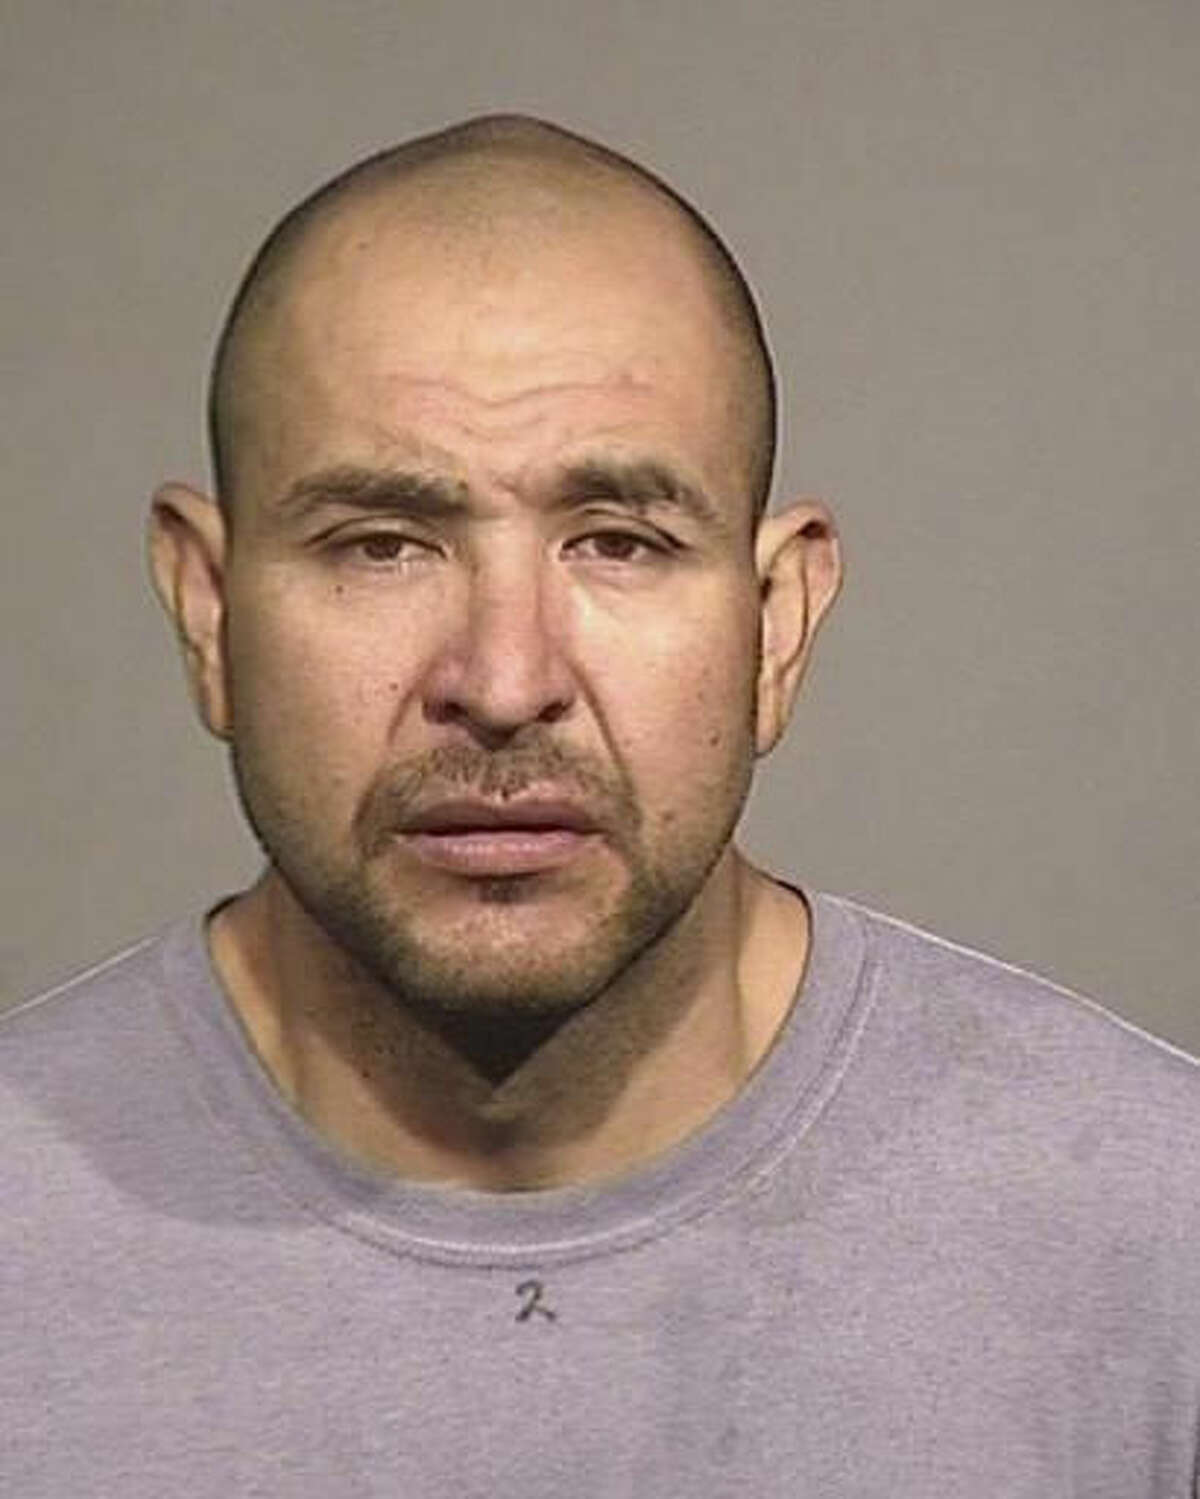 This undated photo released by the Healdsburg Police Department shows Gerardo Mendoza. Police in Northern California have arrested a man on suspicion of drowning his 4-year-old daughter in a baptismal pool in a Healdsburg church and then carrying her body to a nearby police station. Healdsburg police said Monday, Nov. 21, 2016, 42-year-old Gerardo Mendoza stood in the station's back parking lot Sunday night and yelled for help as he held his daughter and another child, his son, stood next to him. (Healdsburg Police Department via AP)